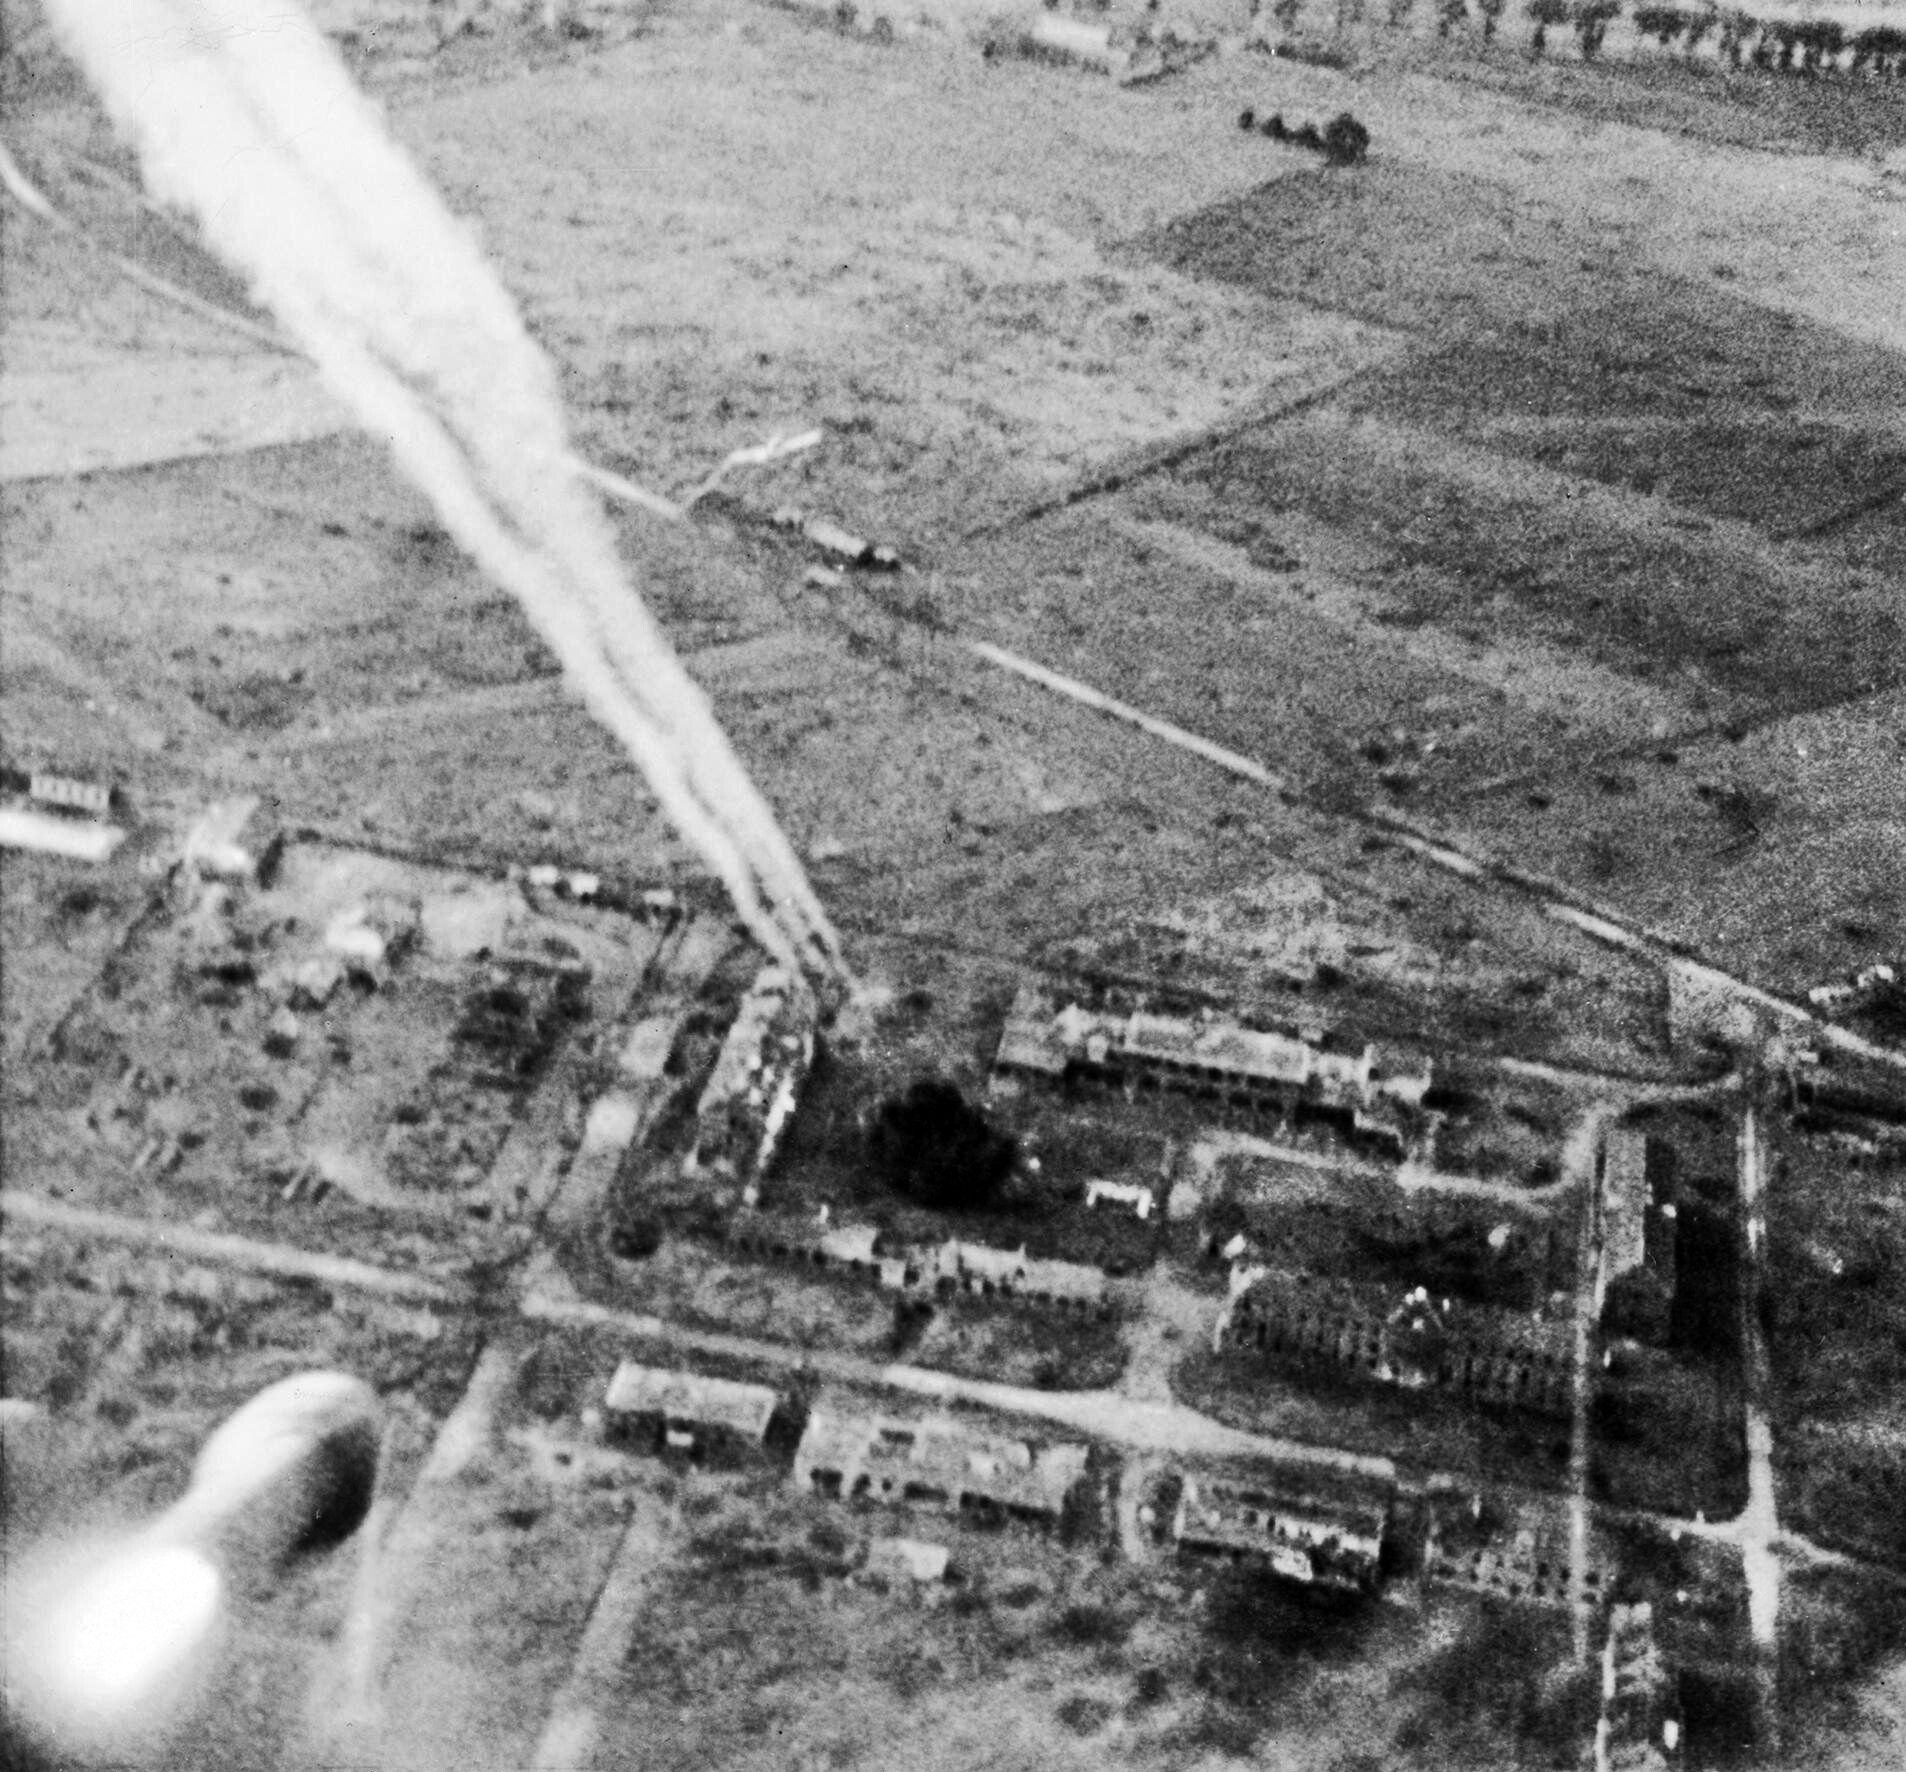 A Hawker Typhoon fighter bomber fires a missile against a target at Carpiquet airfield west of Caen. The airfield was tenaciously defended, but after several attempts, troops of the Canadian 3rd Division captured the important location on July 4, 1944.